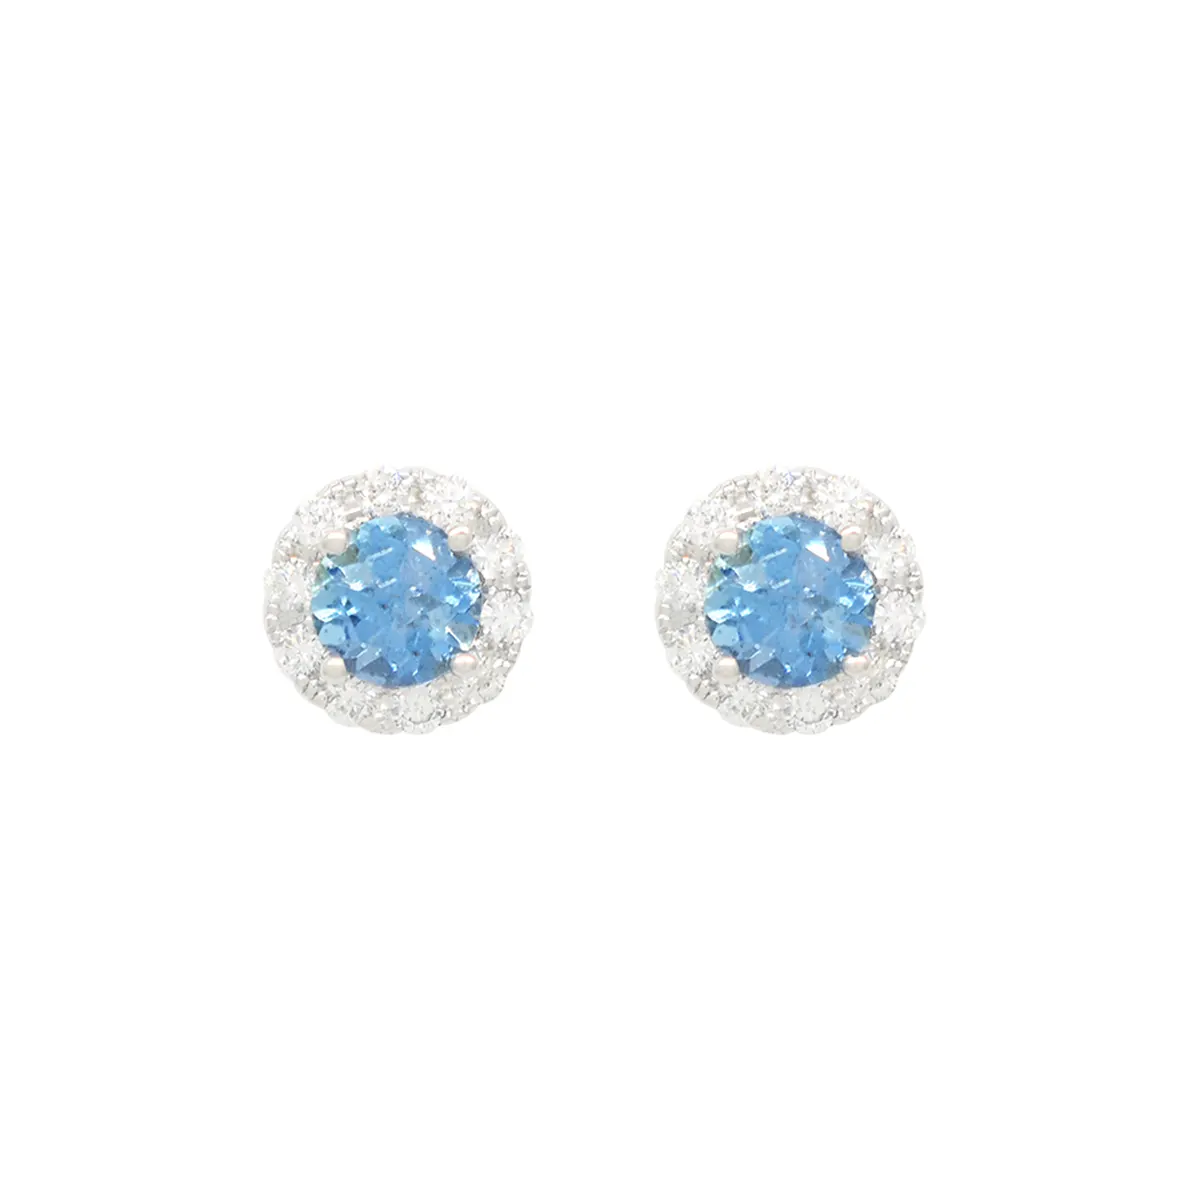 dainty-stud-earrings-with-aquamarine-and-diamond-halo-in-18k-white-gold